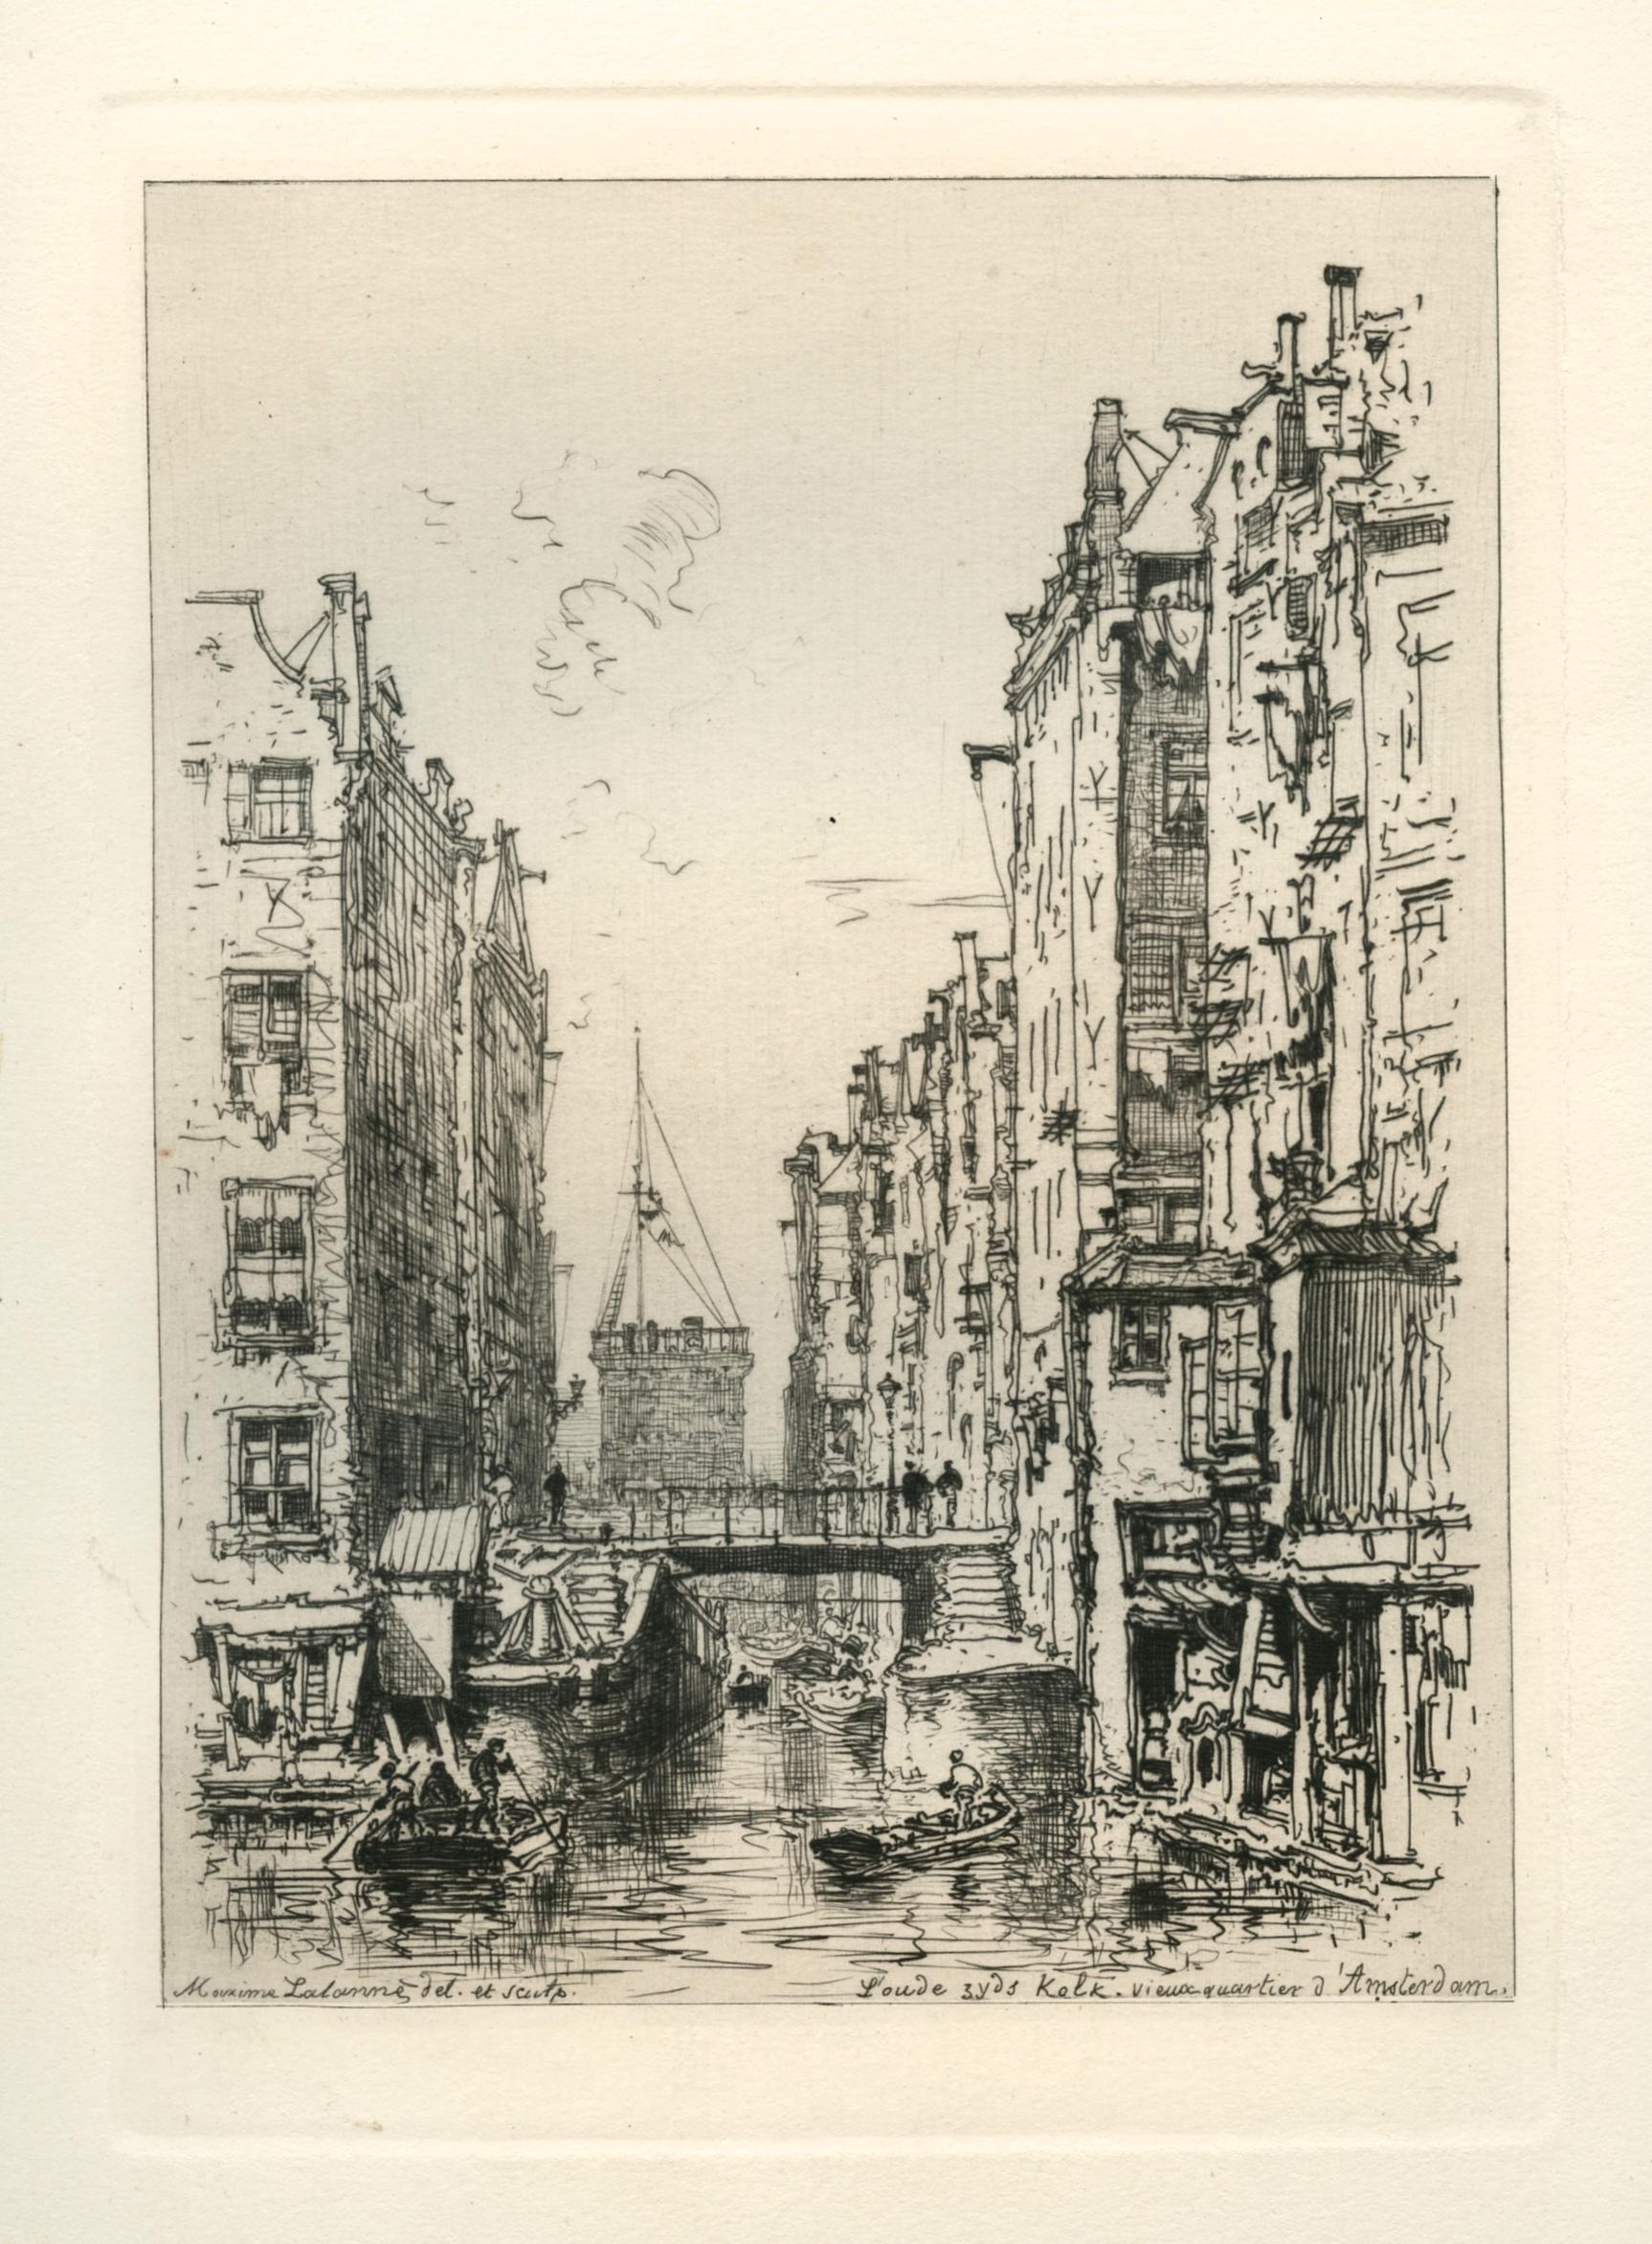 "View in Amsterdam" original etching - Print by Maxime Lalanne